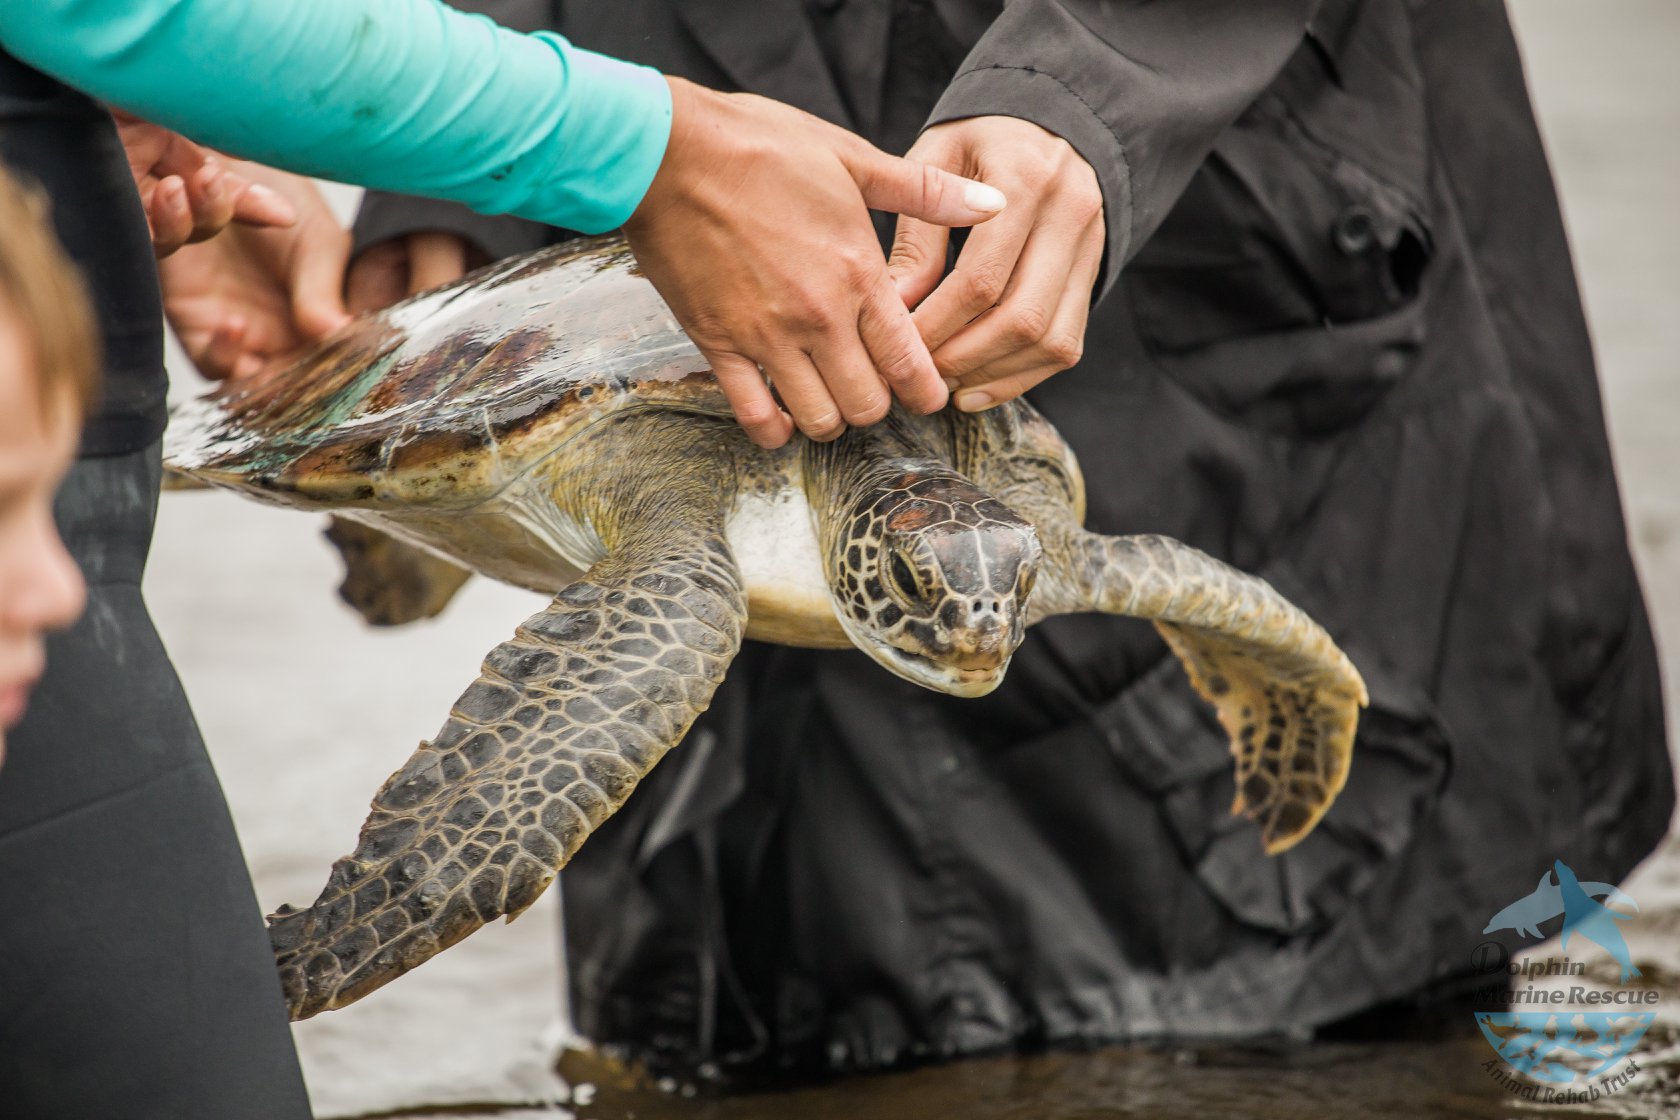 A Prosthetic Flipper to Give Injured Sea Turtles a Second Chance